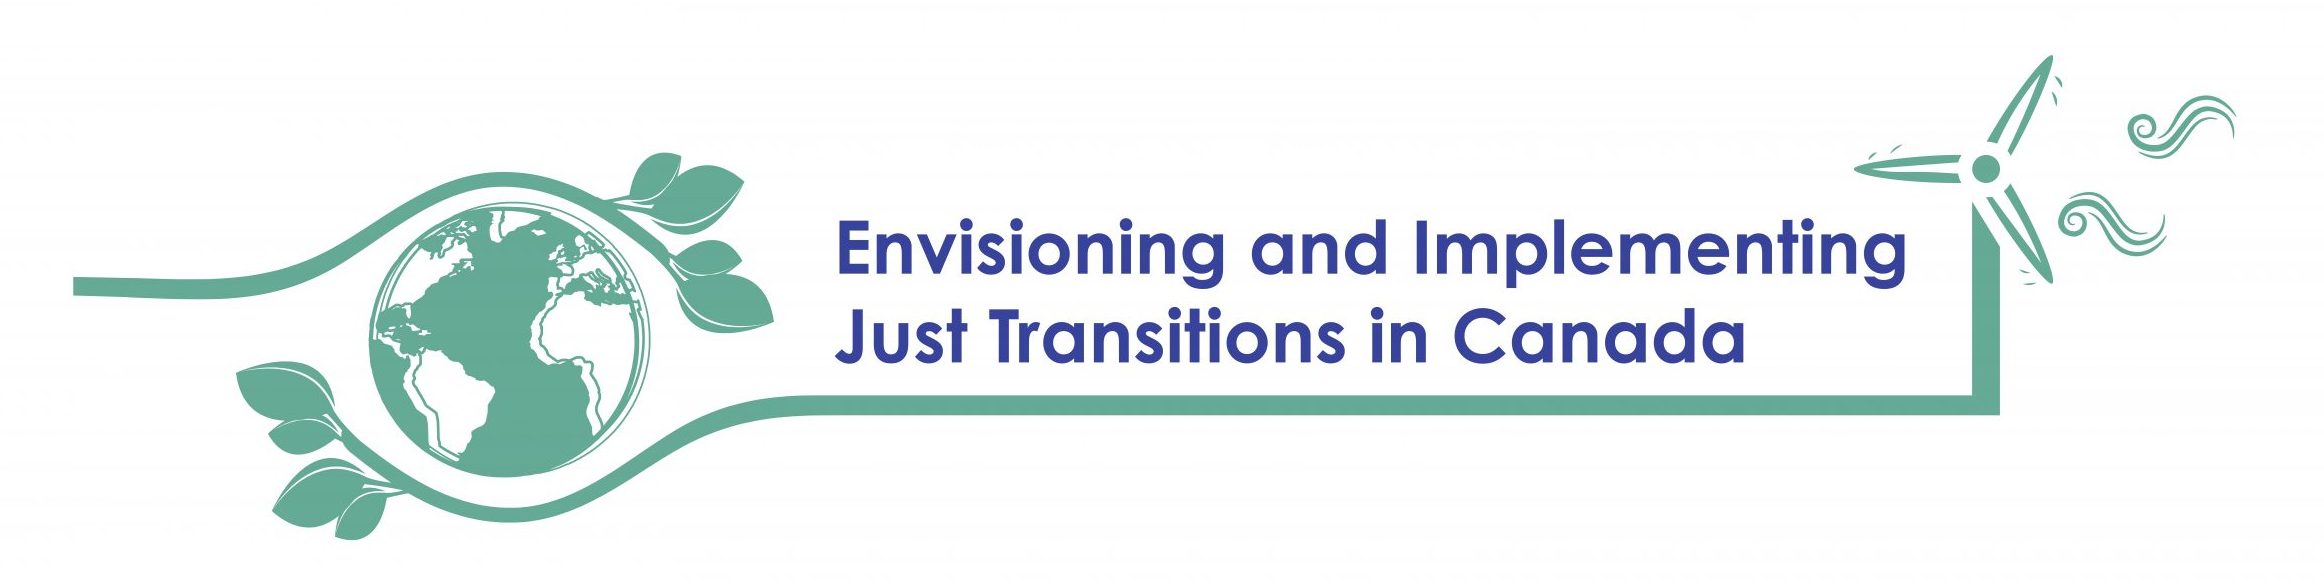 Envisioning and Implementing Just Transitions in Canada